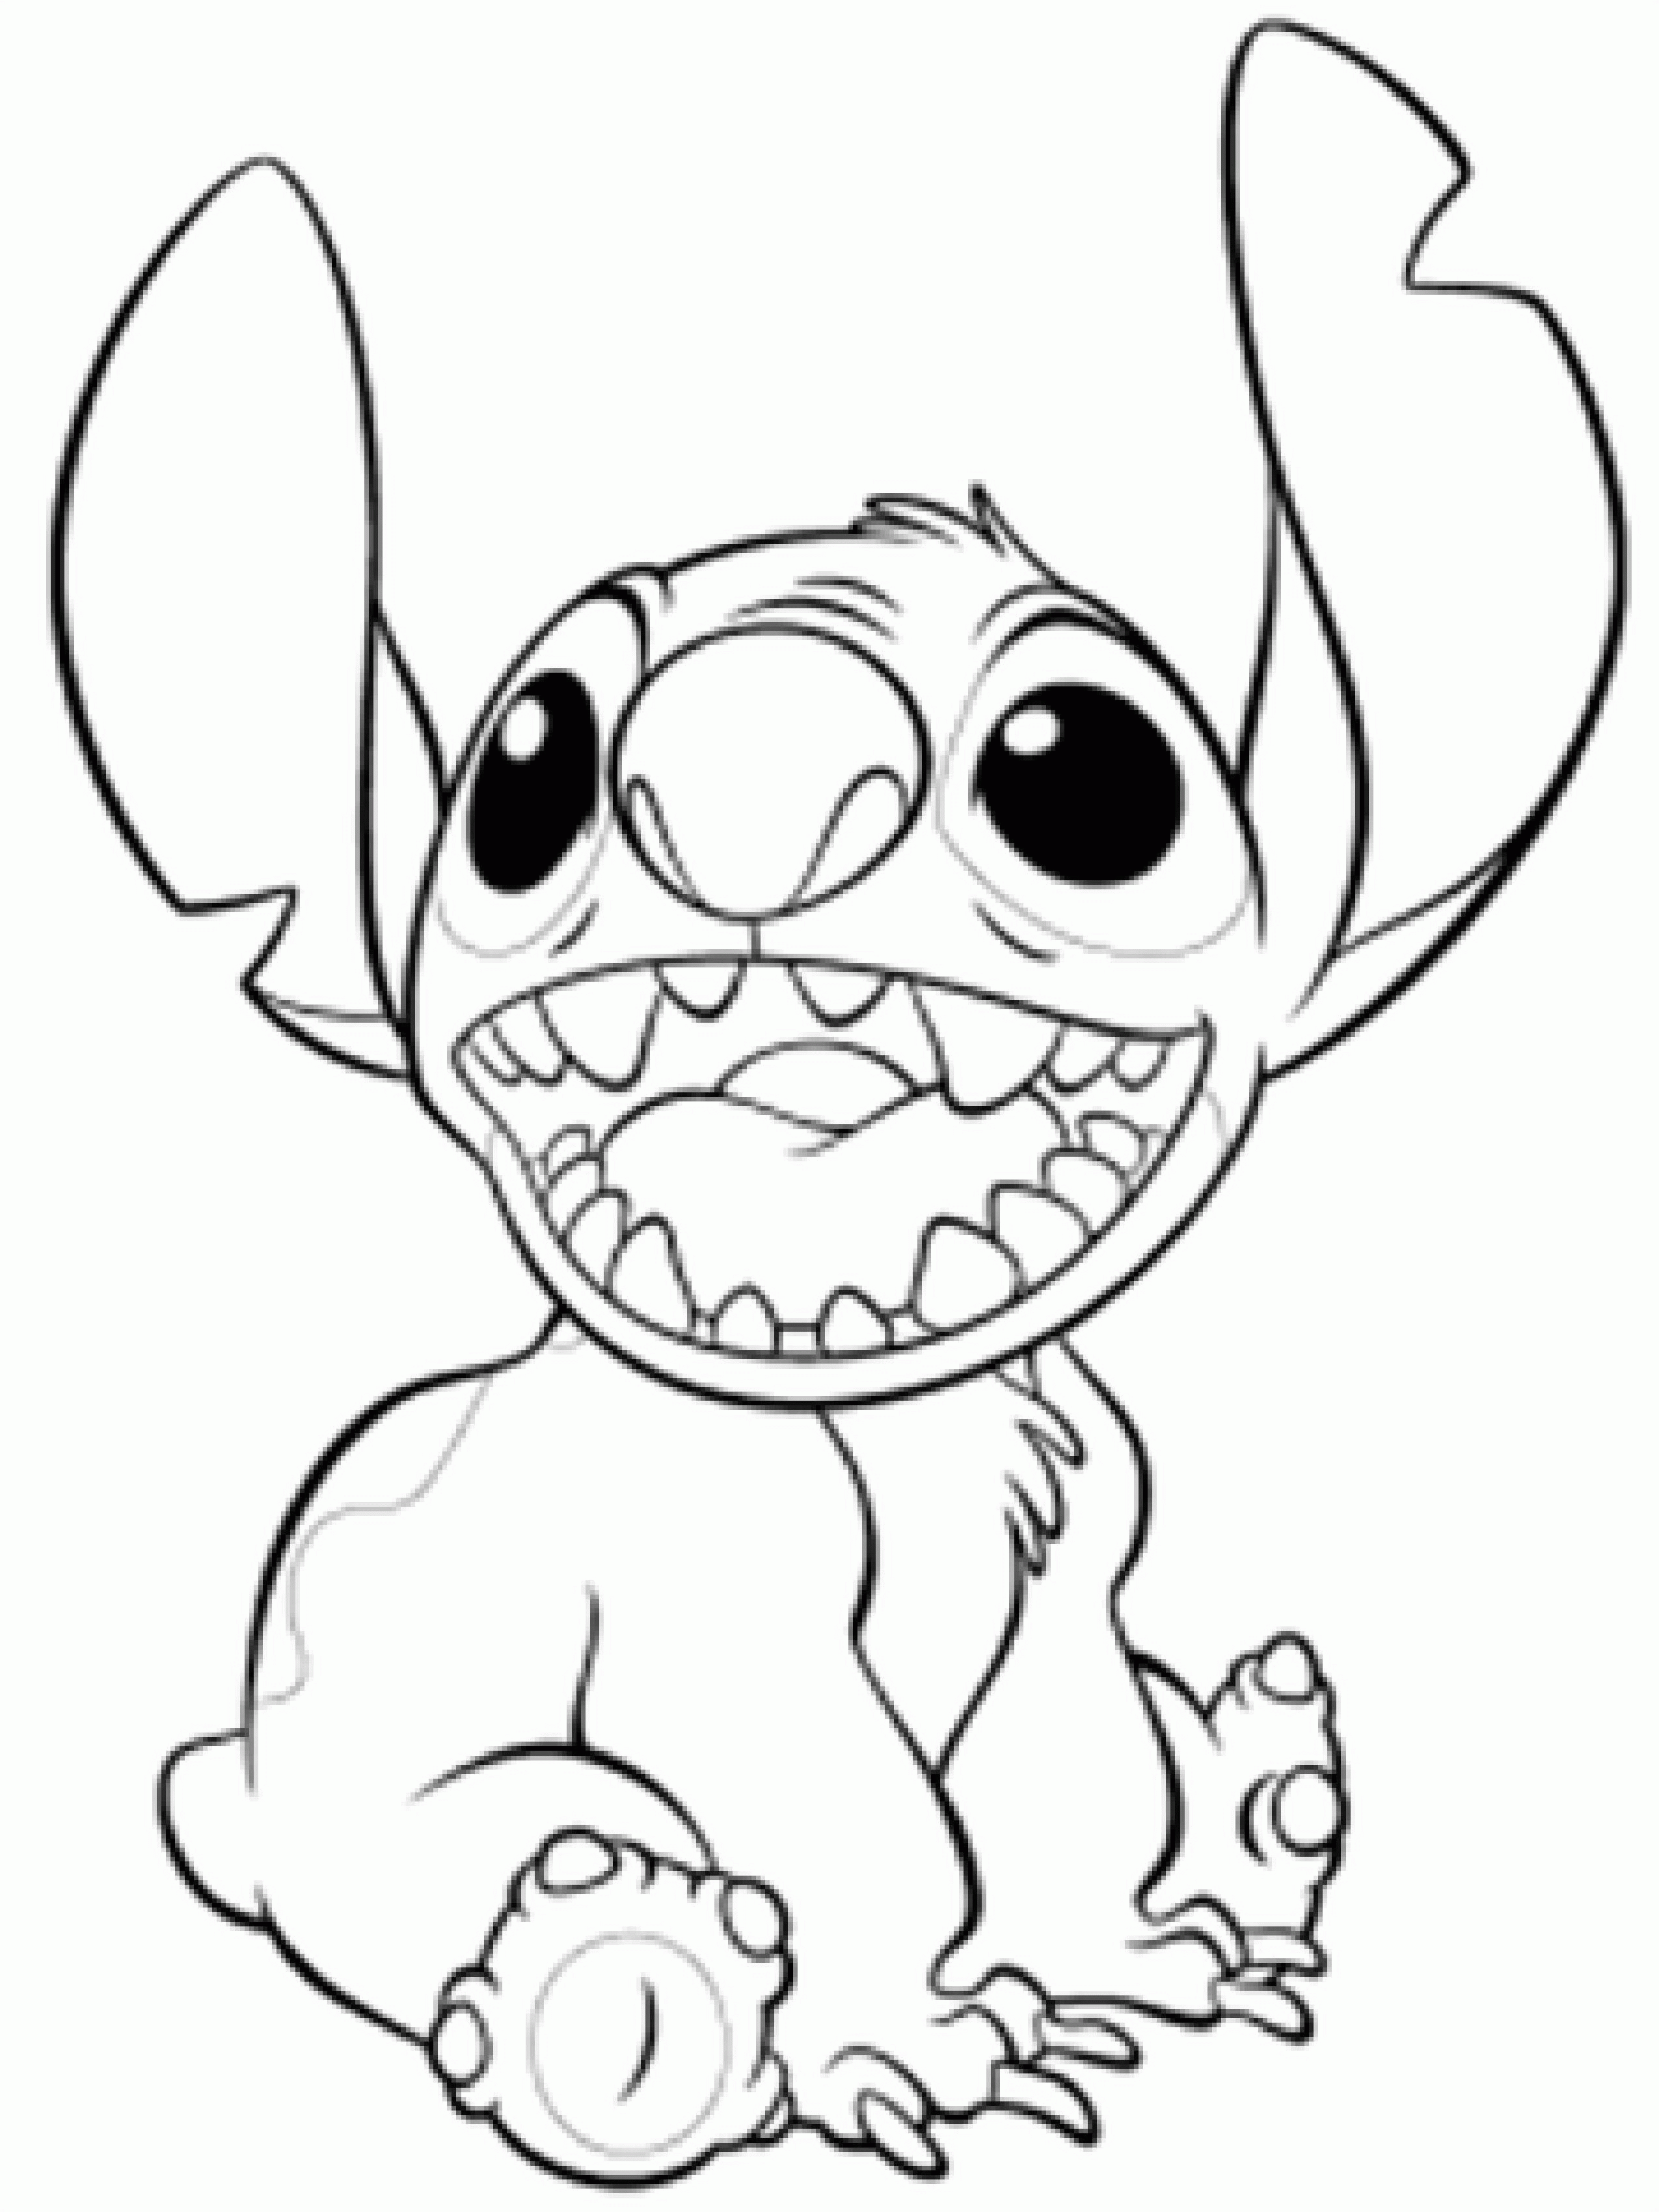 Funny To Print - Coloring Pages For Kids And For Adults - Coloring Home